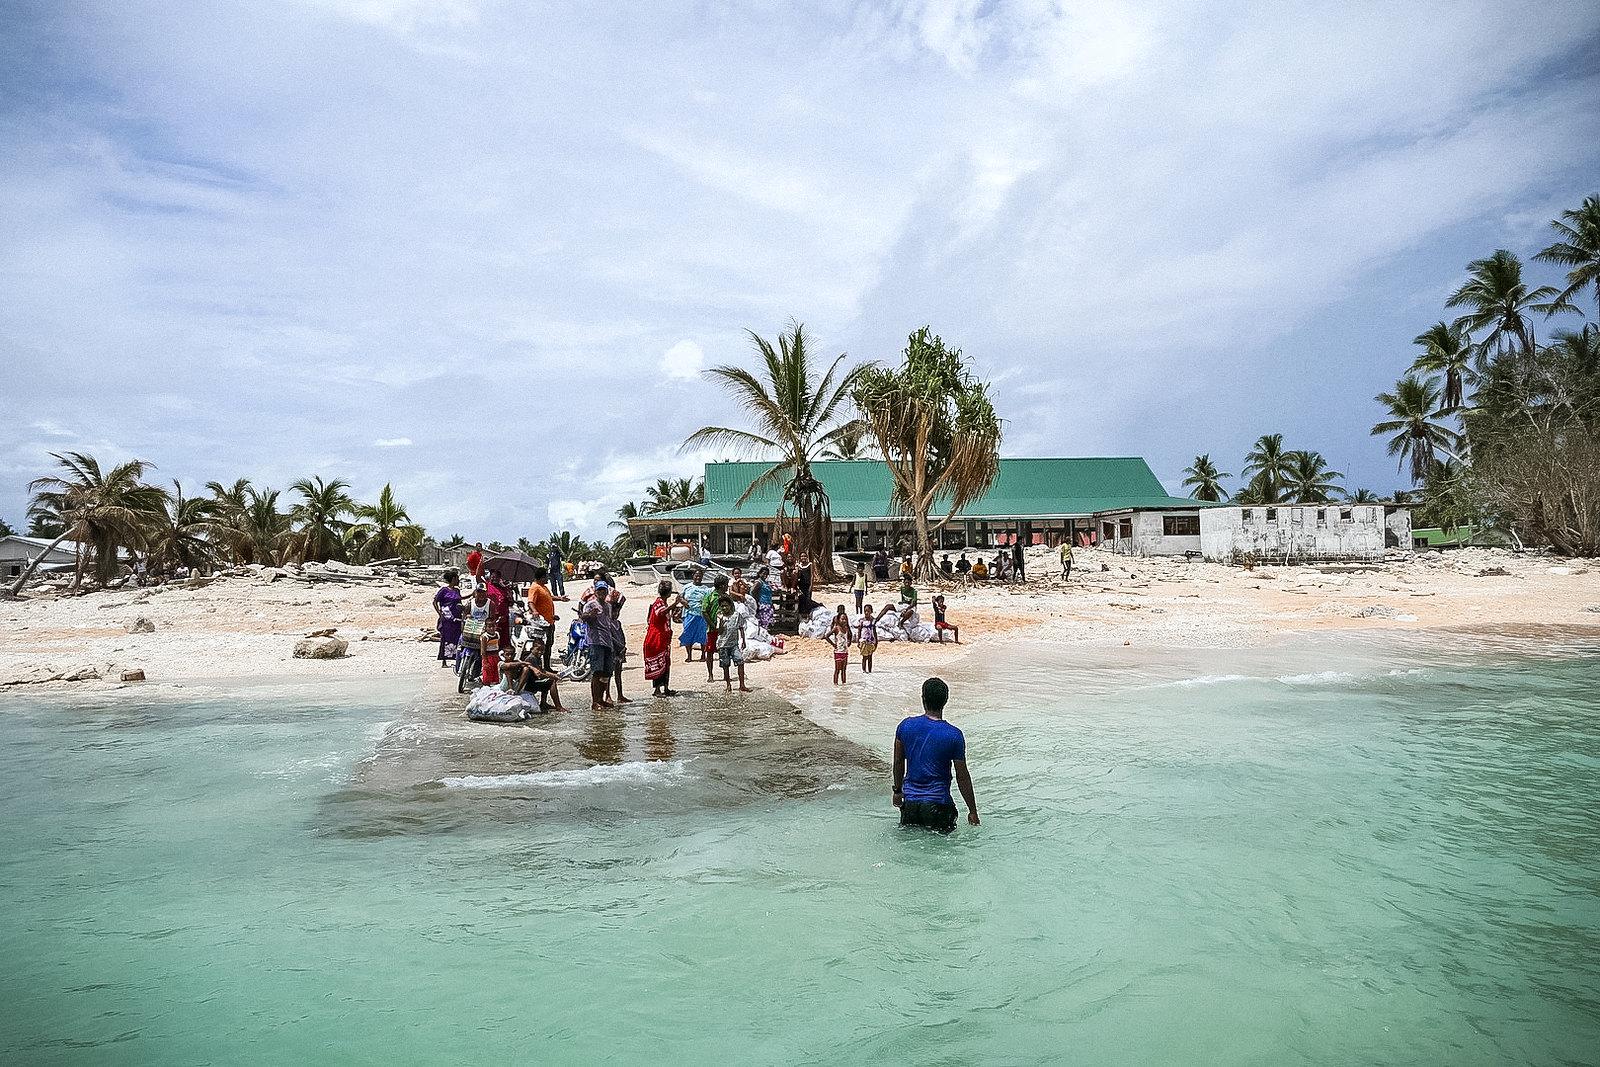 The community of Nui island waves goodbye to the Prime Minister of Tuvalu and his delegation visiting after Cyclone Pam